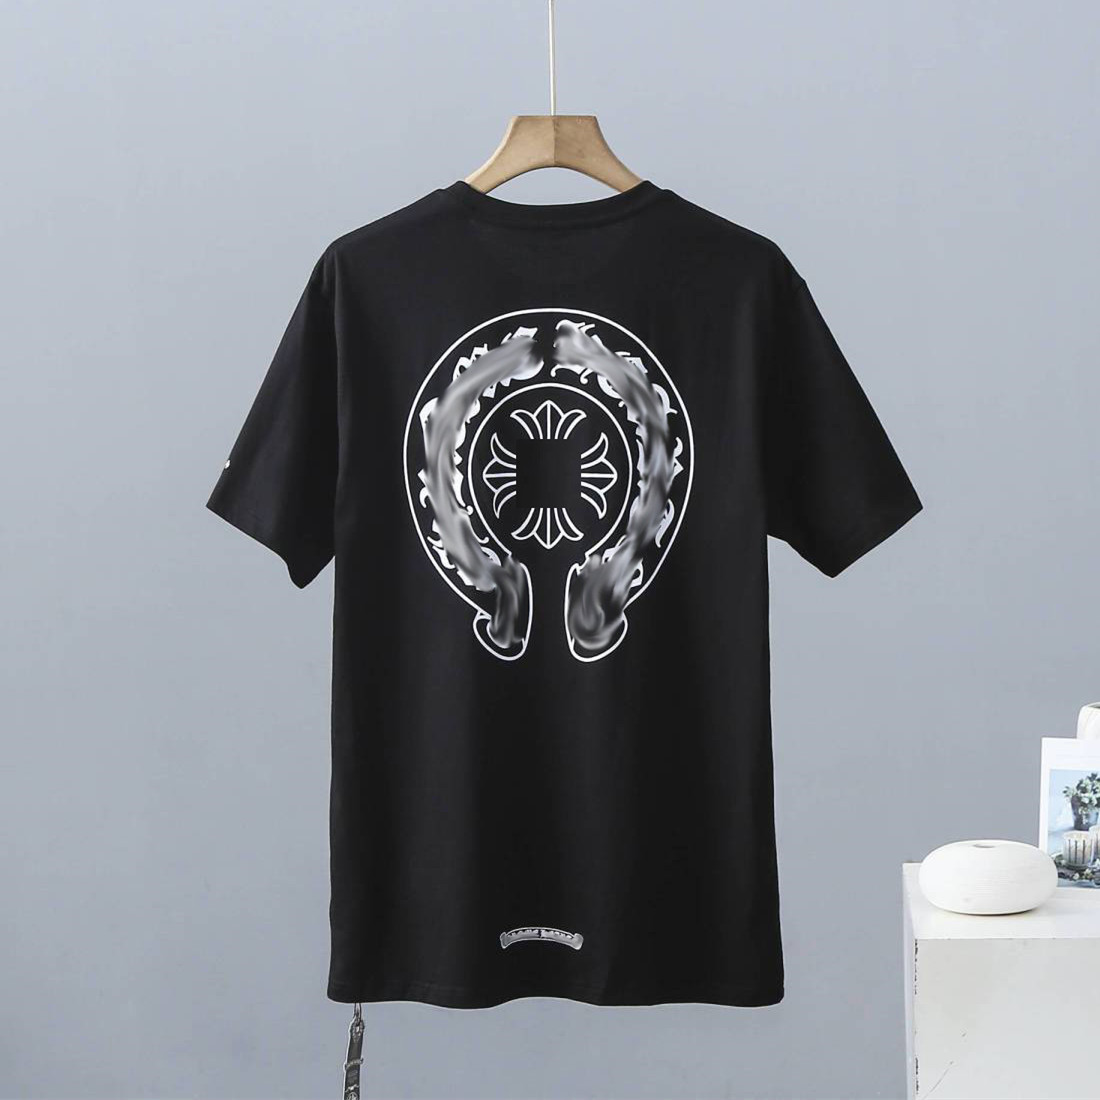 

Classic Fashion Mens t Shirts High Quality Sanskrit Letter T-shirt Horseshoe Cross Pattern Tshirts Designers Hip Hop Sweater Woman Summer Tops Tees Hcub, If you need more detailed picture